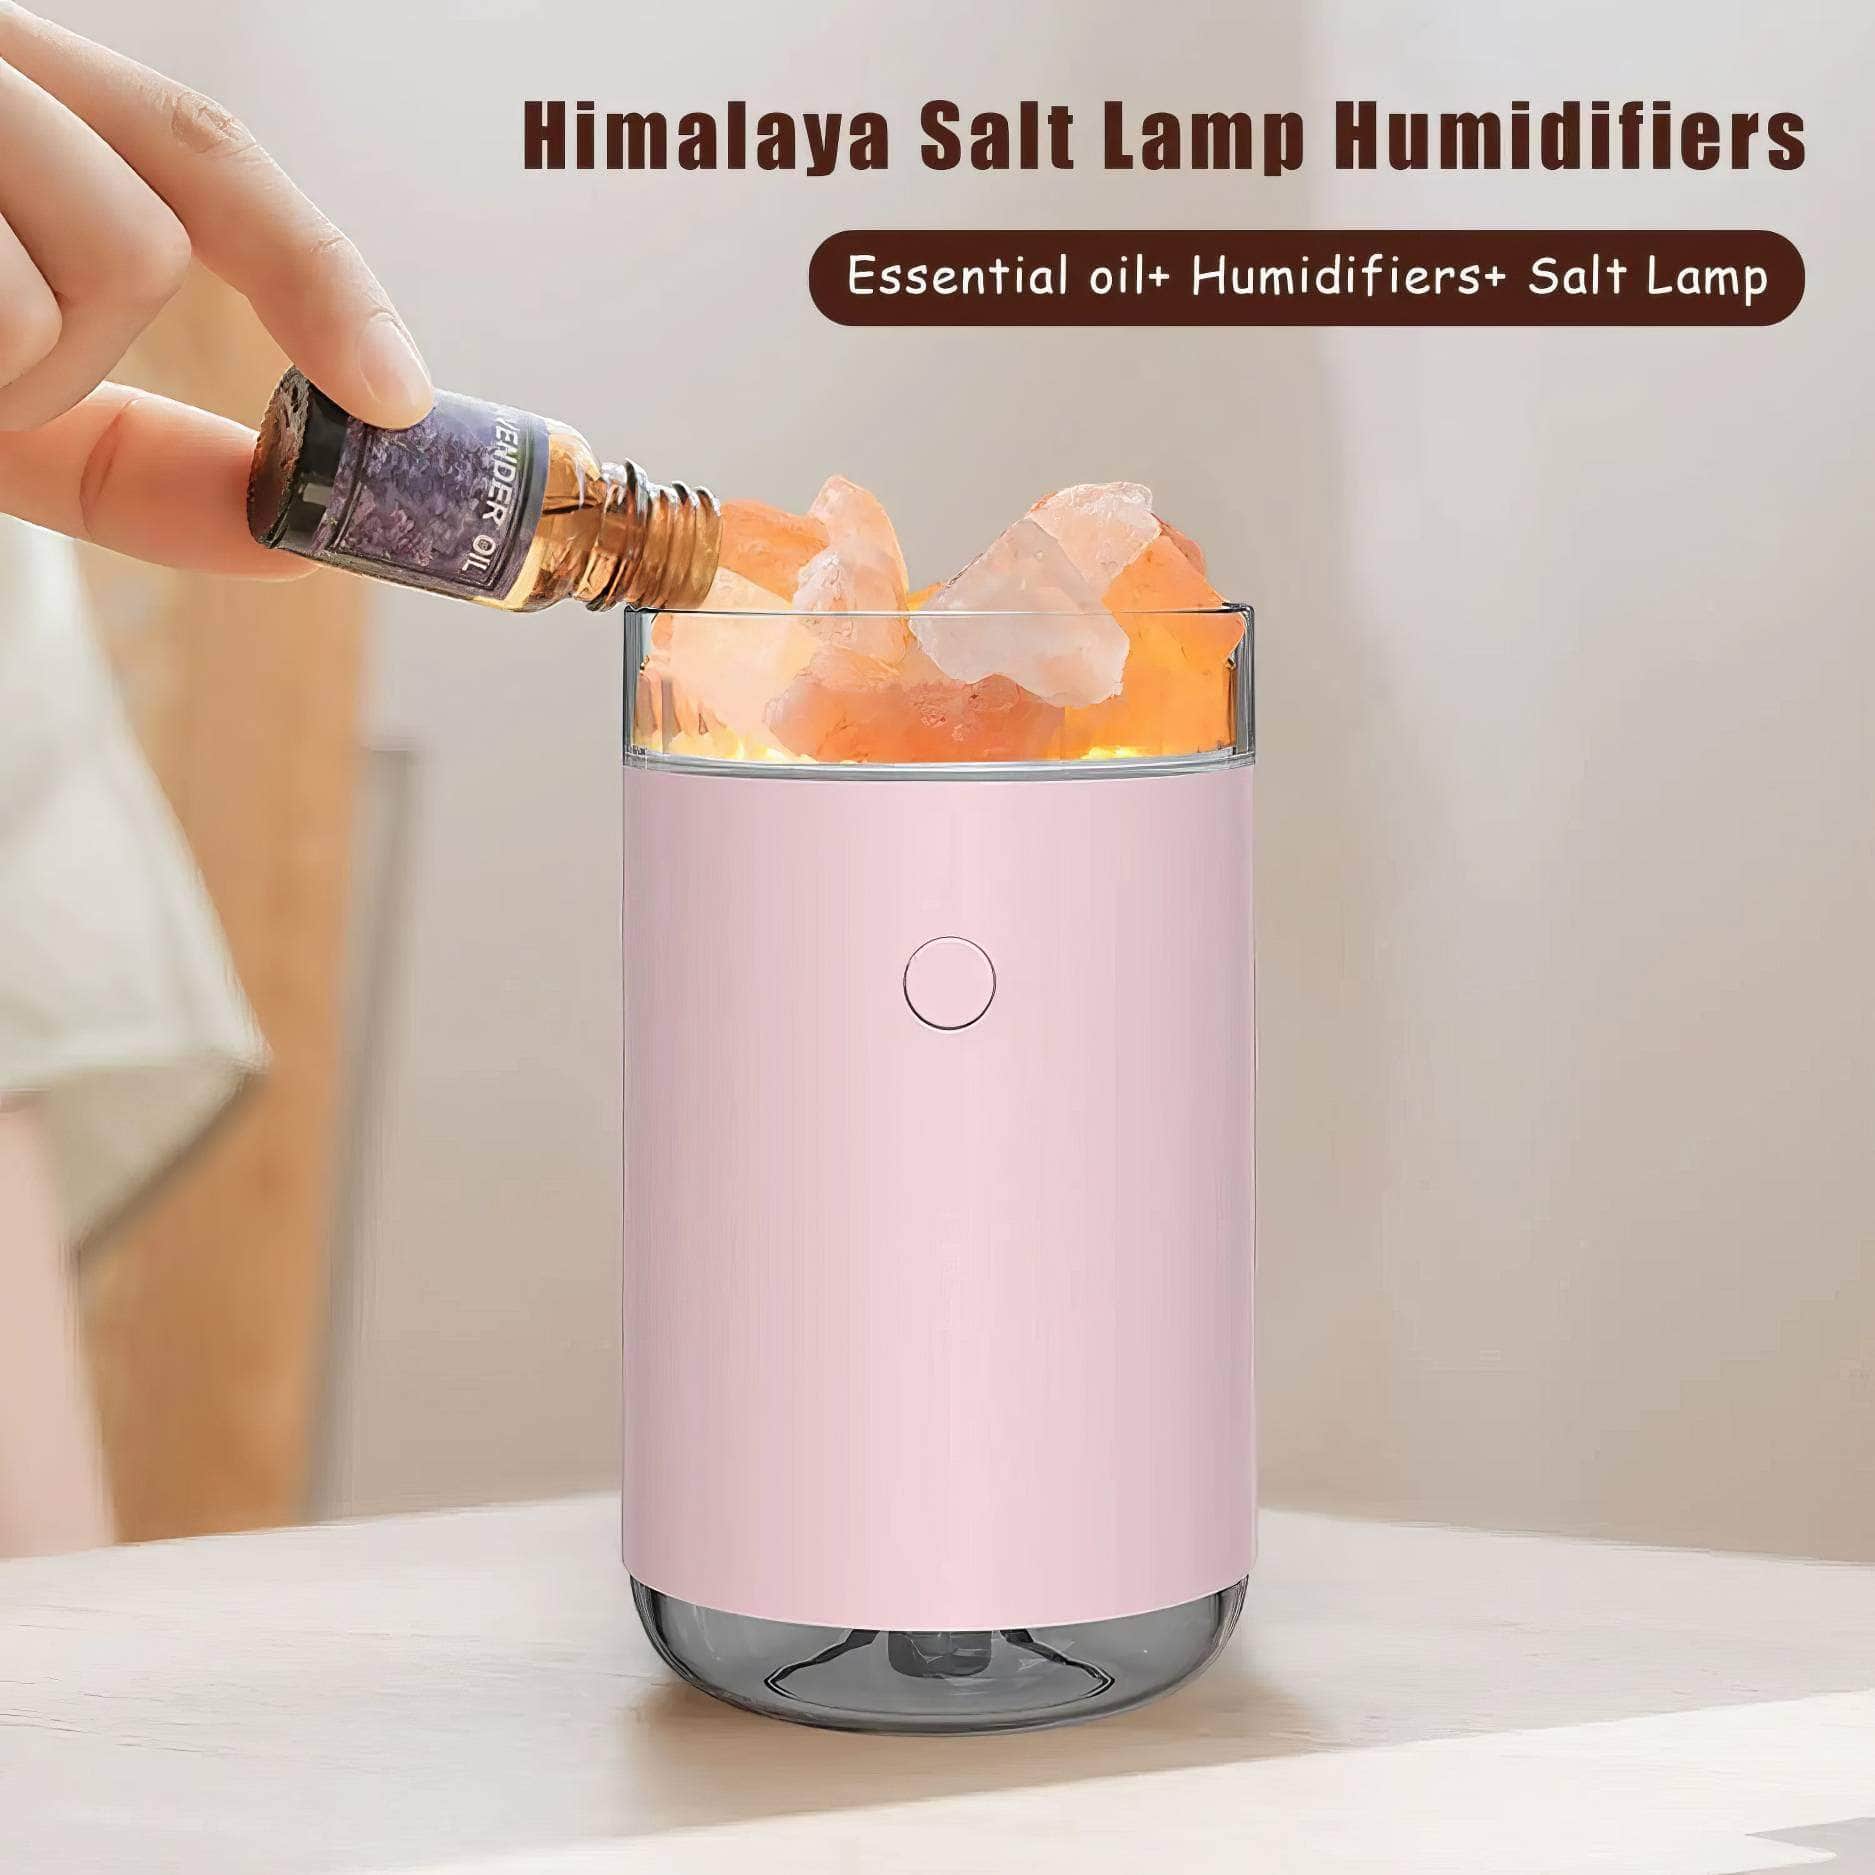 Himalayan Salt Lamp Humidifier - Cute Cool Mist, Ultra Quiet Operation, Mini Desk Air Humidifiers for Room Decor and Gifts